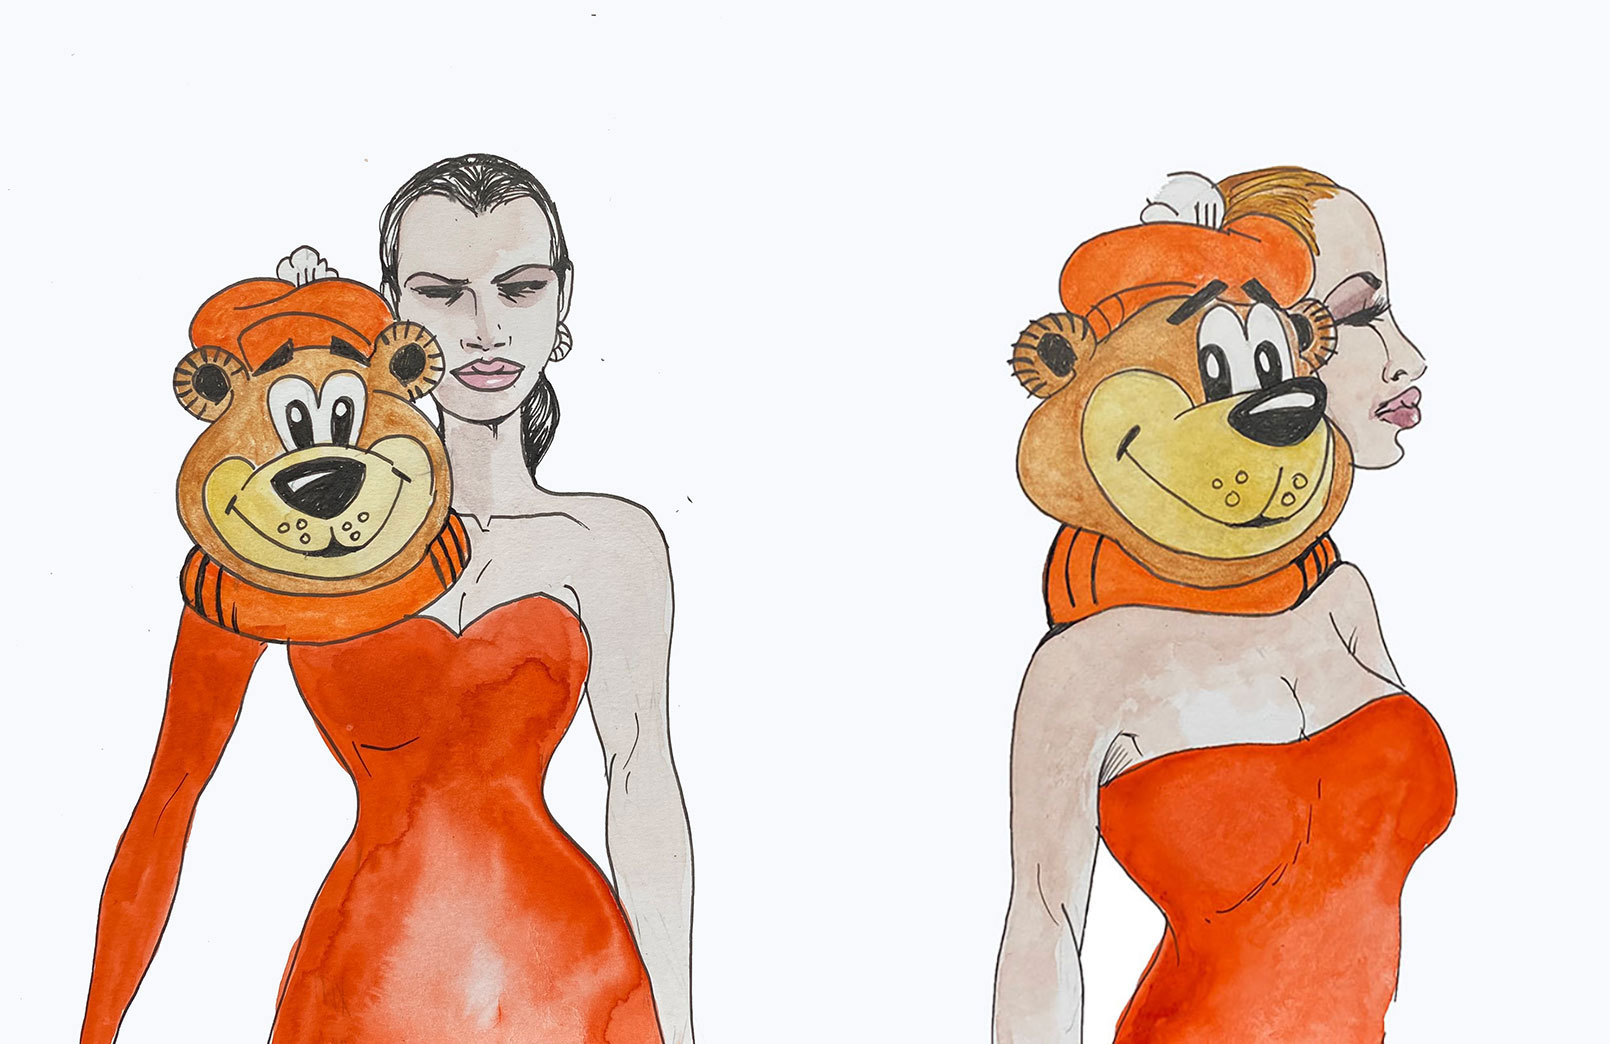 Two illustrations depict a runway model in an orange dress with the head of the A&W root beer bear mascot on her shoulder. He is a cartoon bear wearing an orange toque.